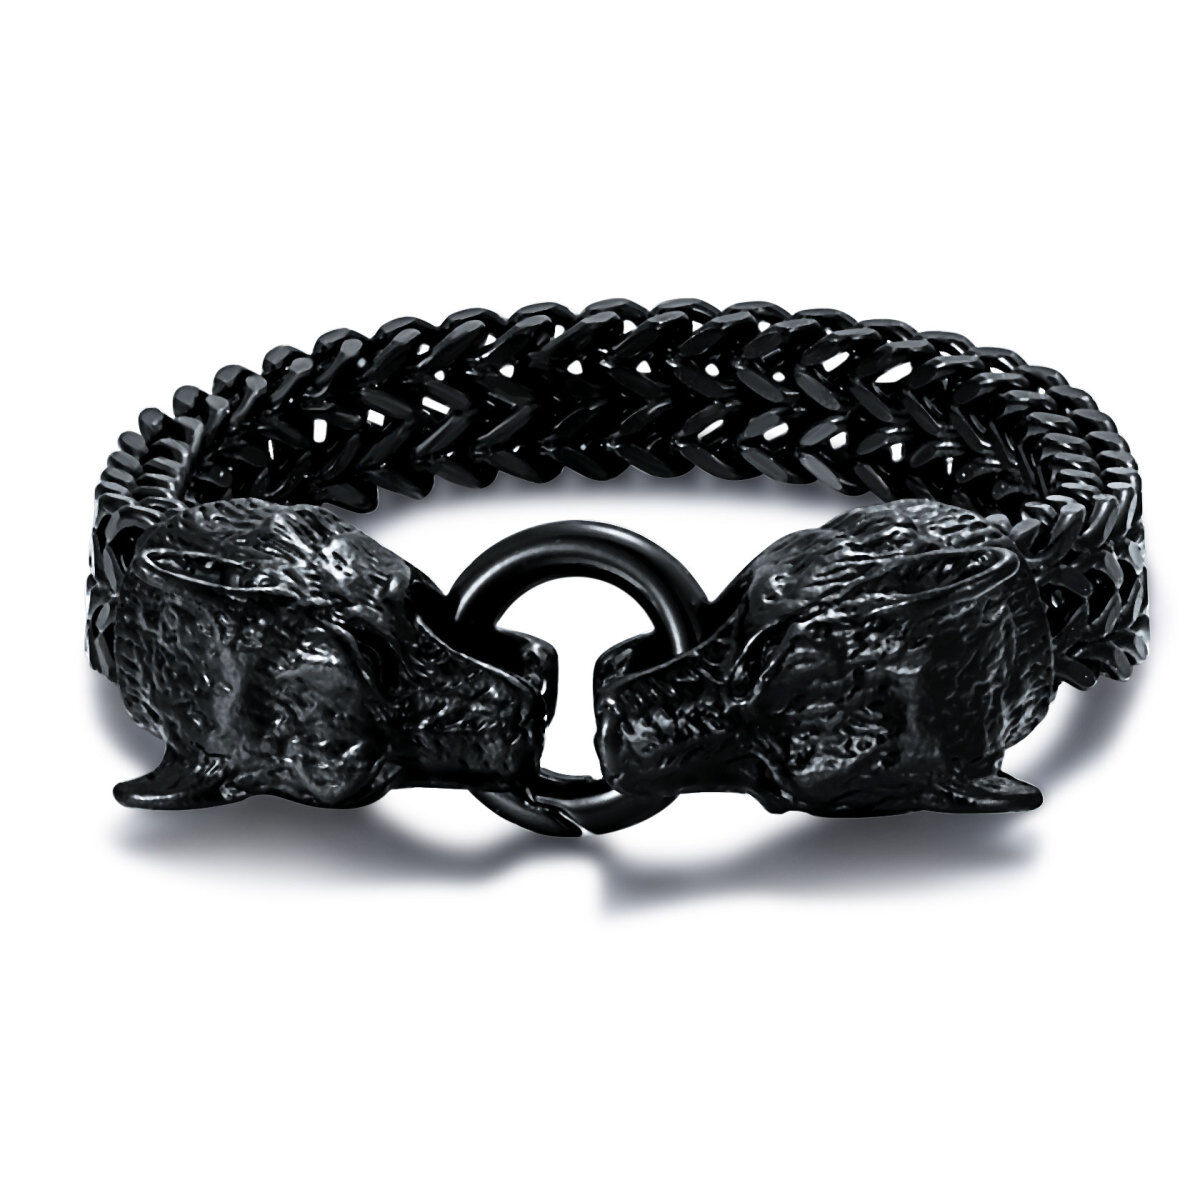 Stainless Steel with Black Color Plated Dragon Chain Bracelet for Men-1